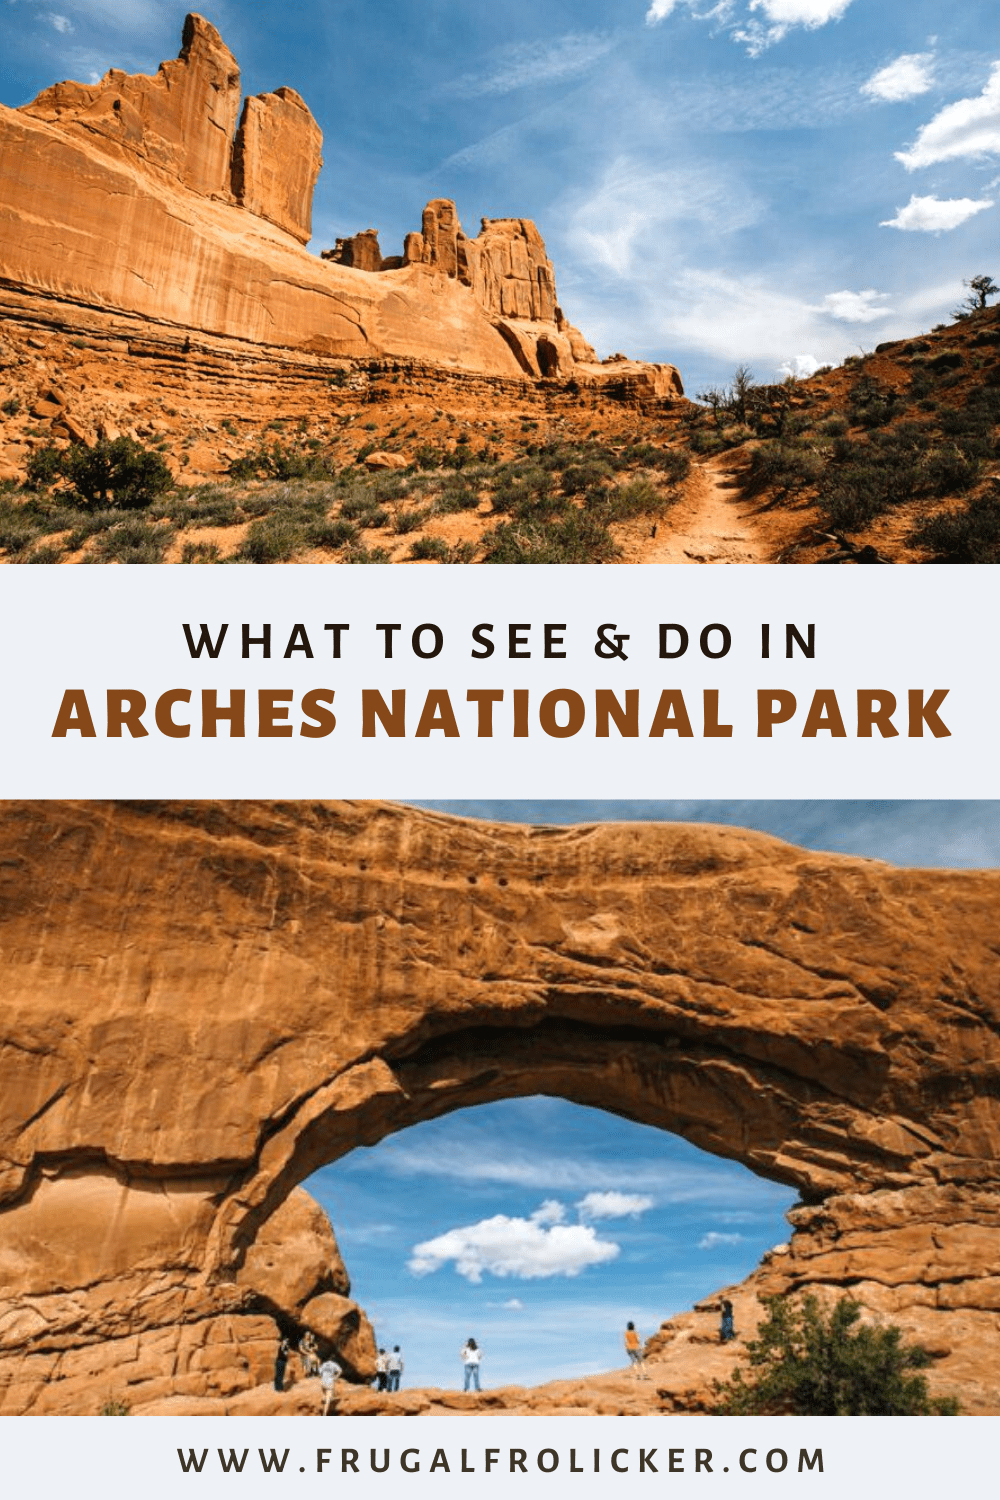 What to see and do at Arches National Park